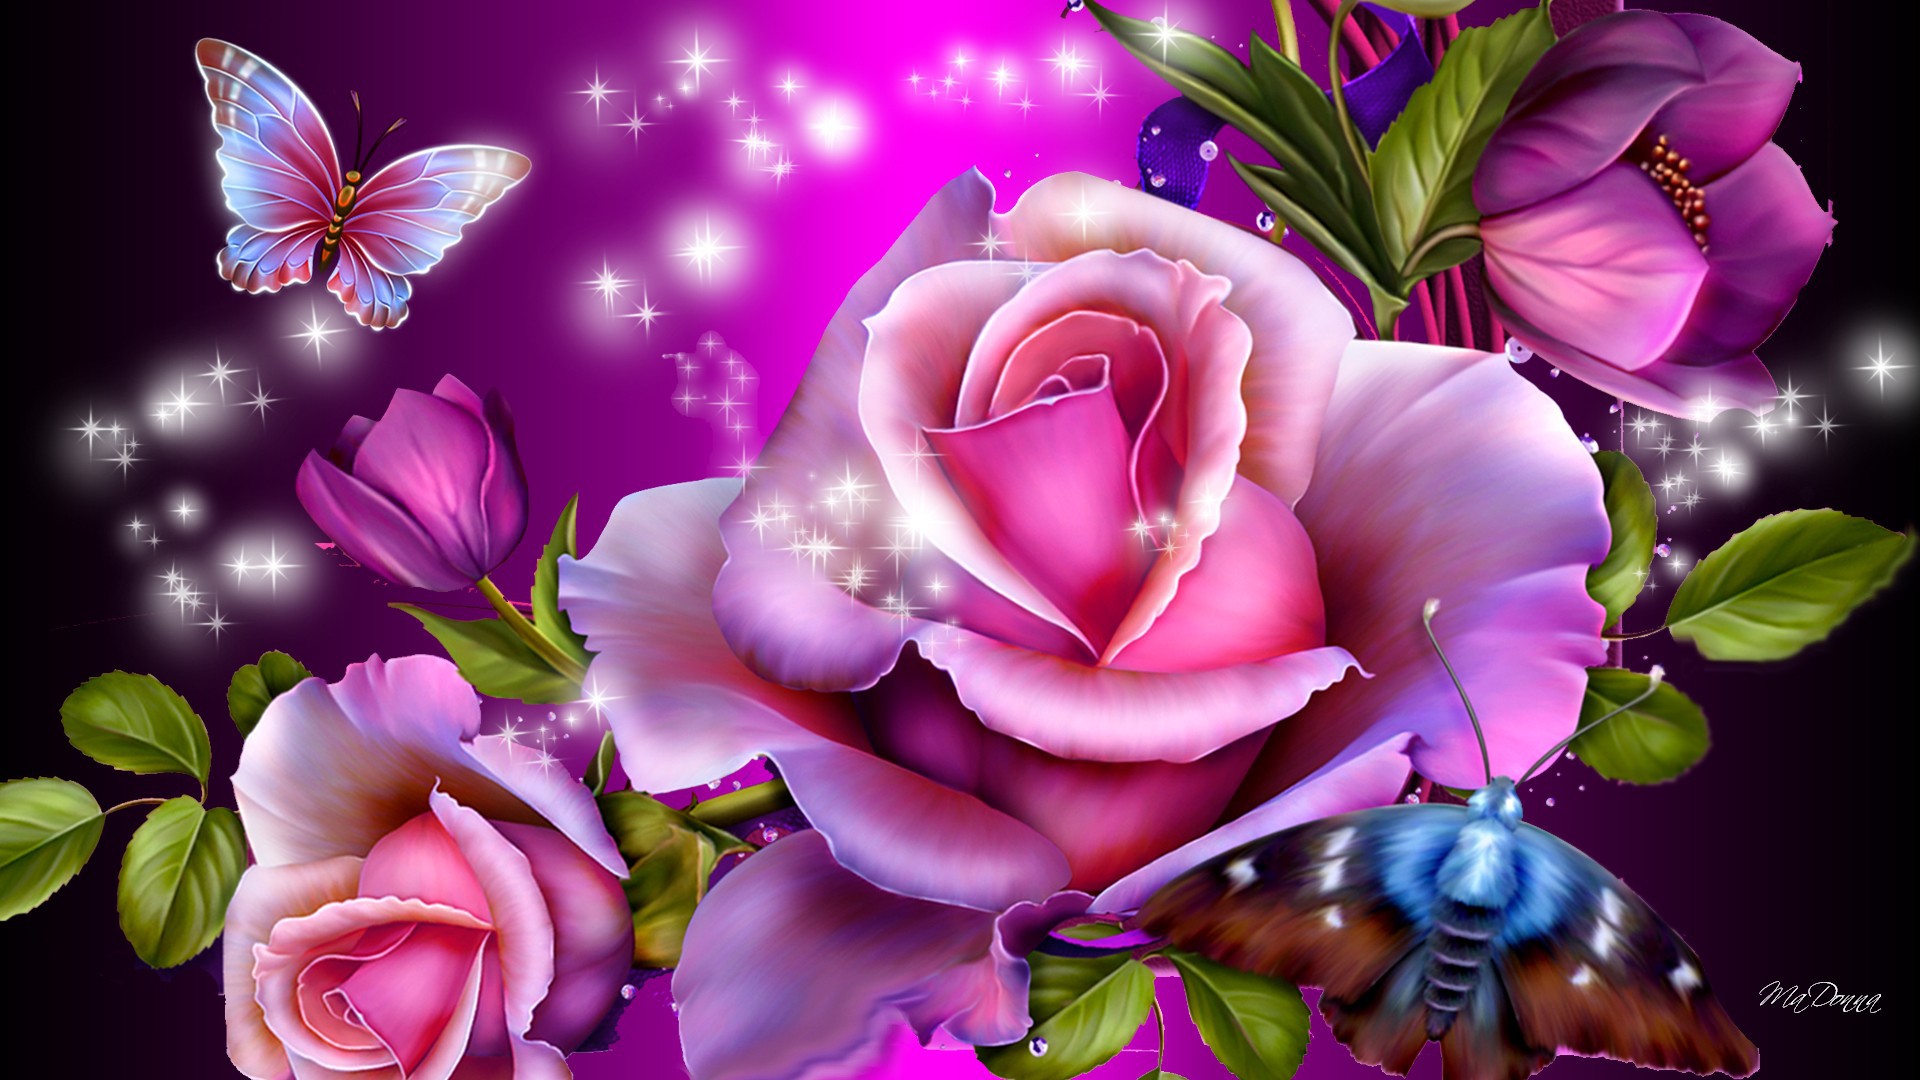 Purple roses and butterflies wallpapers and images   wallpapers